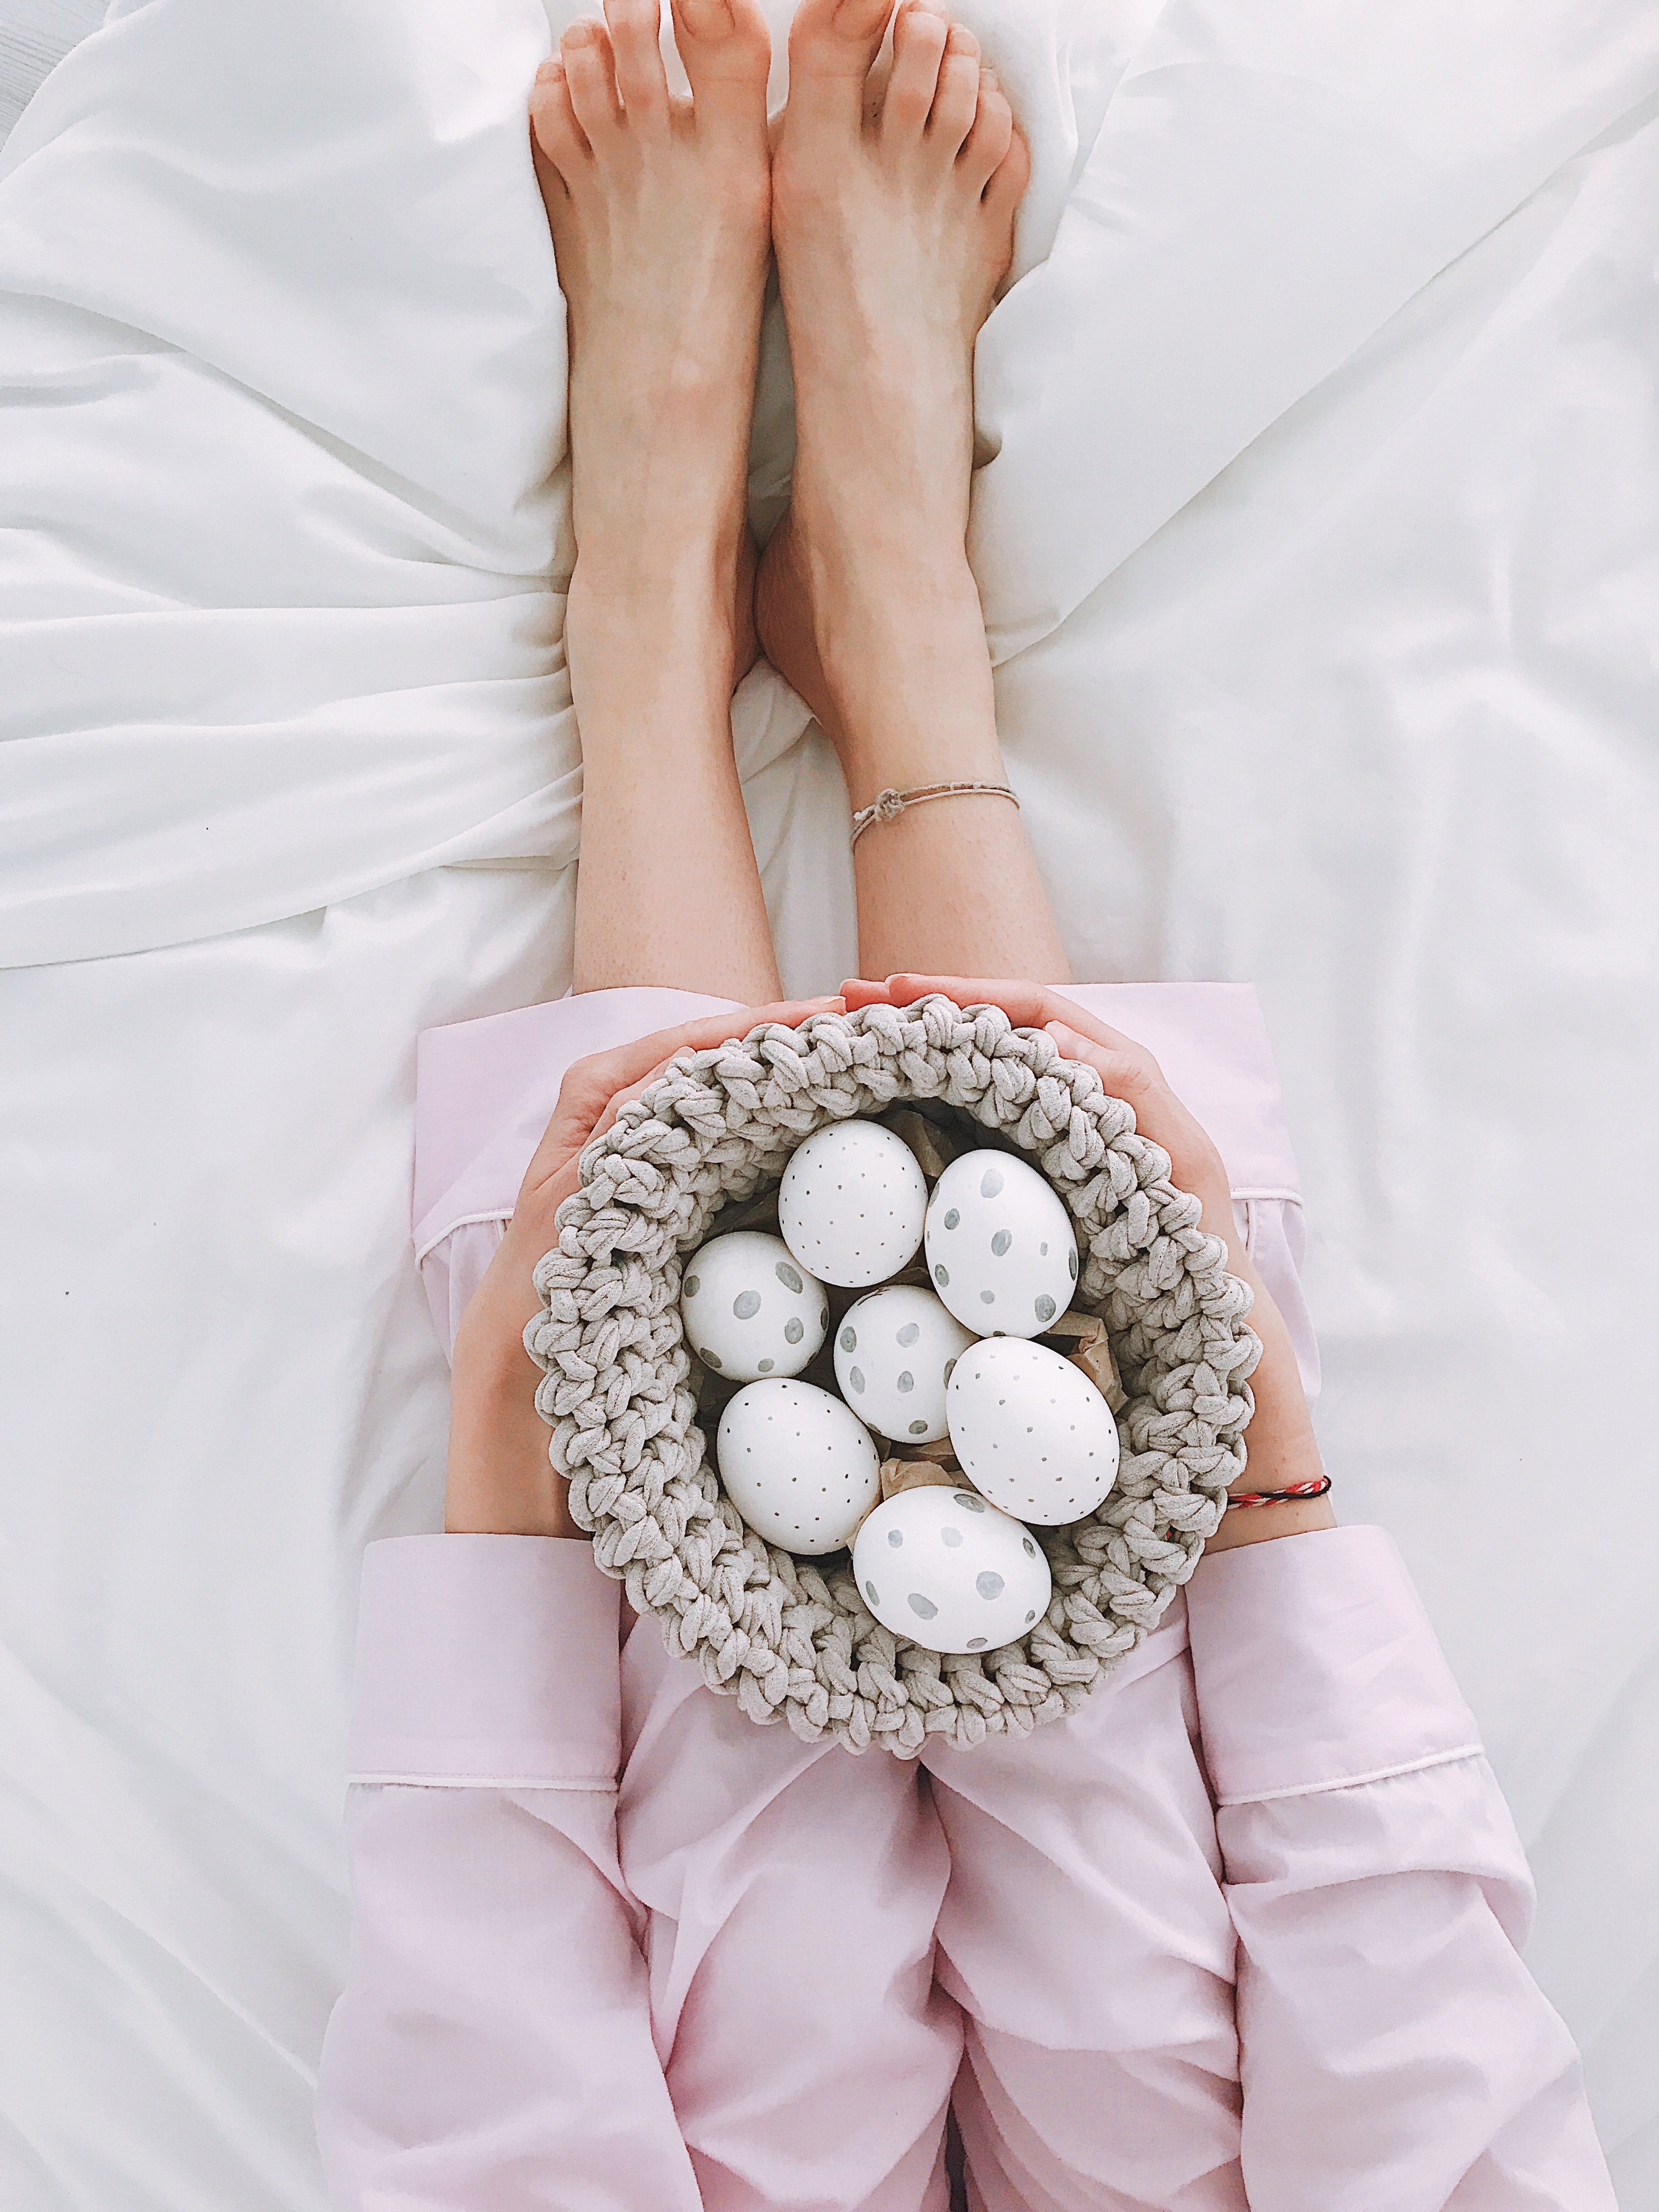 Woman Holding Gray Crochet Bowl With Seven Painted Eggs, Adult, Hands, Style, Relaxation, HQ Photo